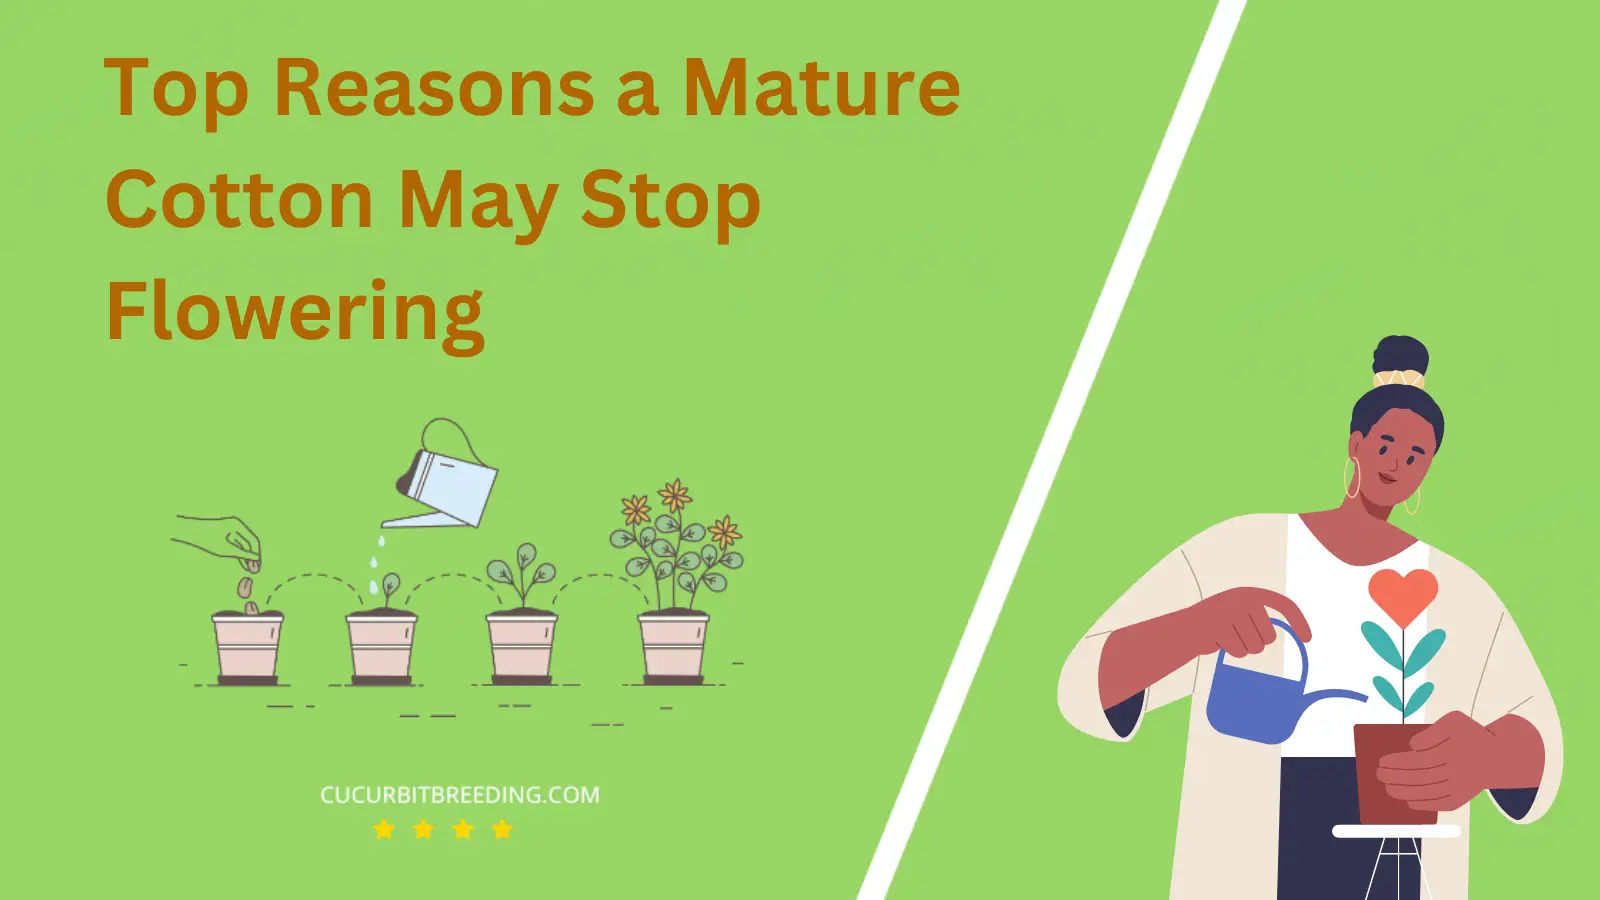 Top Reasons a Mature Cotton May Stop Flowering